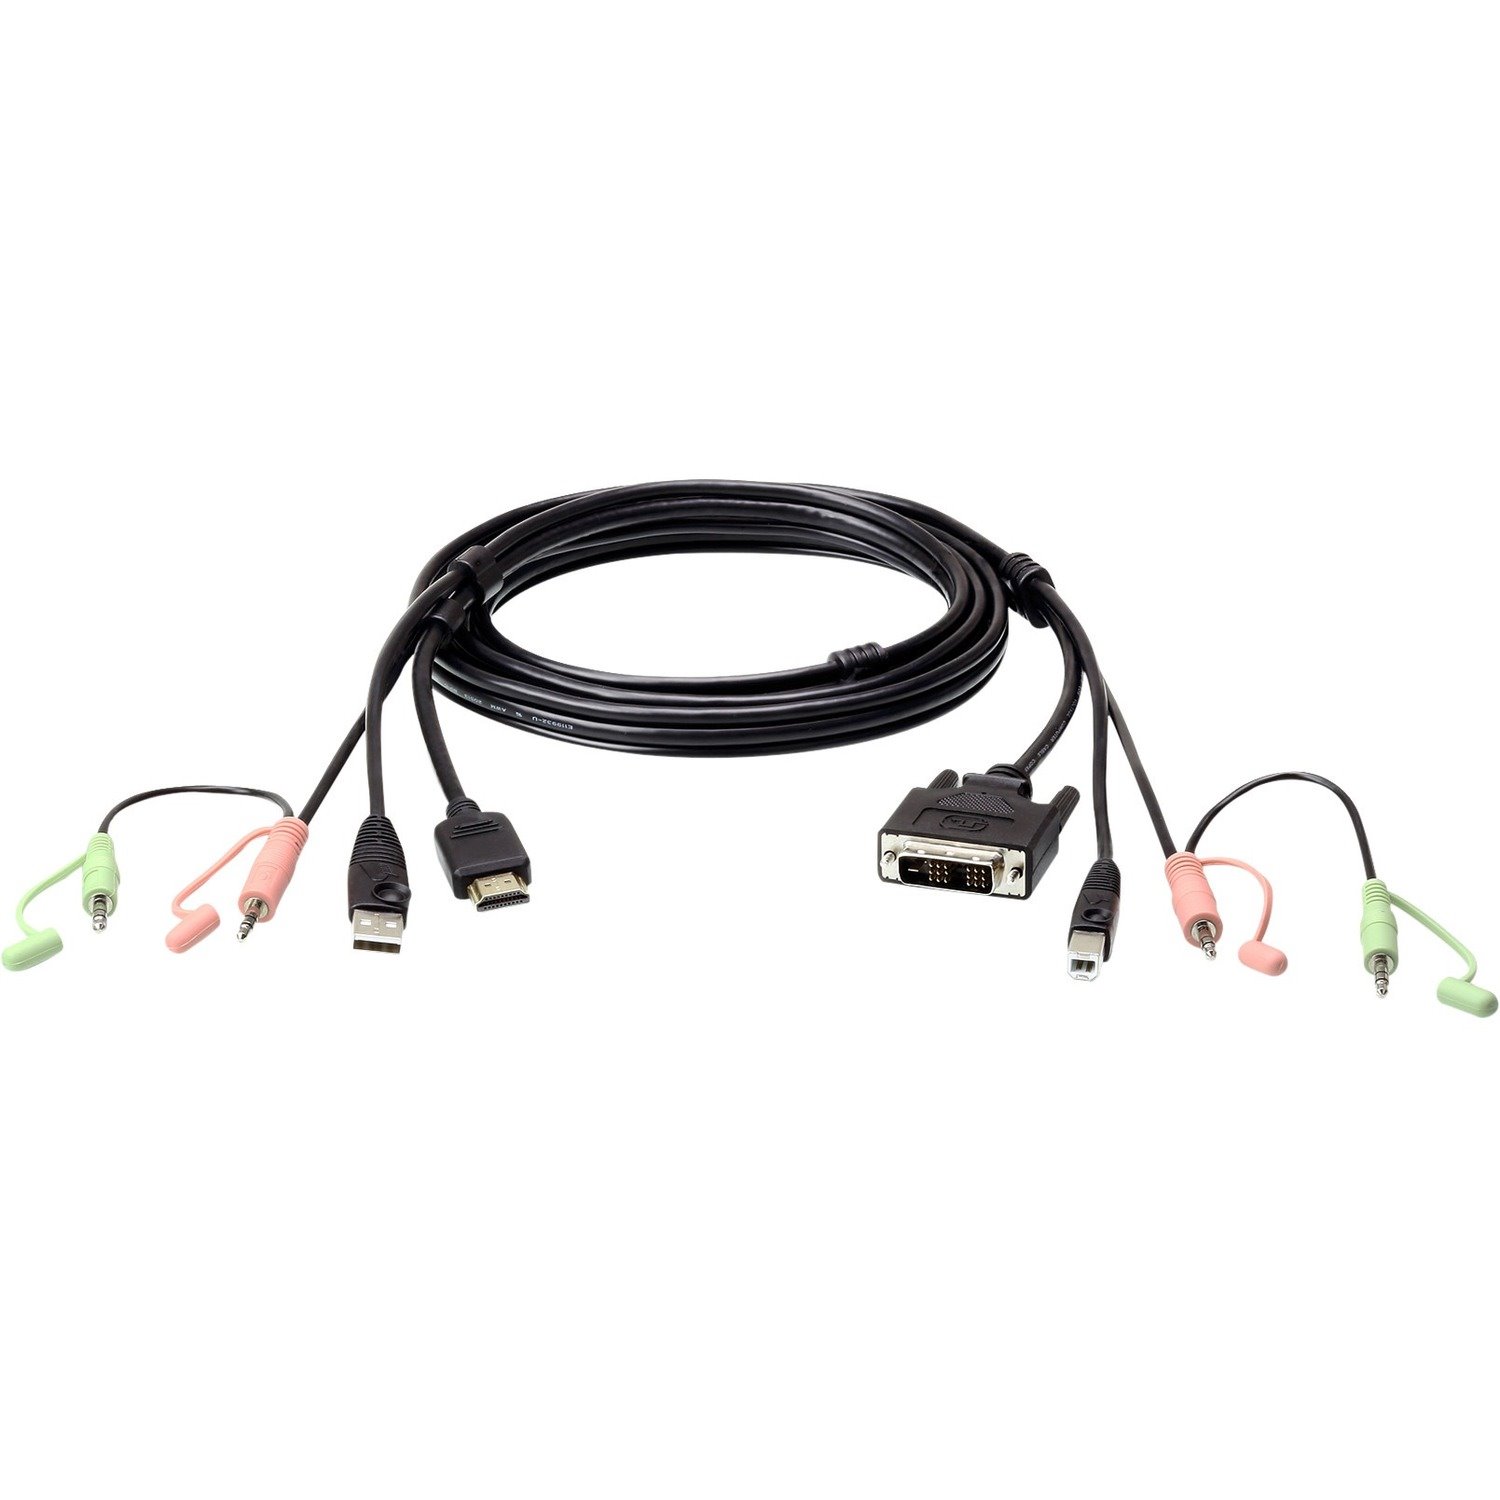 ATEN 1.8M USB HDMI to DVI-D KVM Cable with Audio